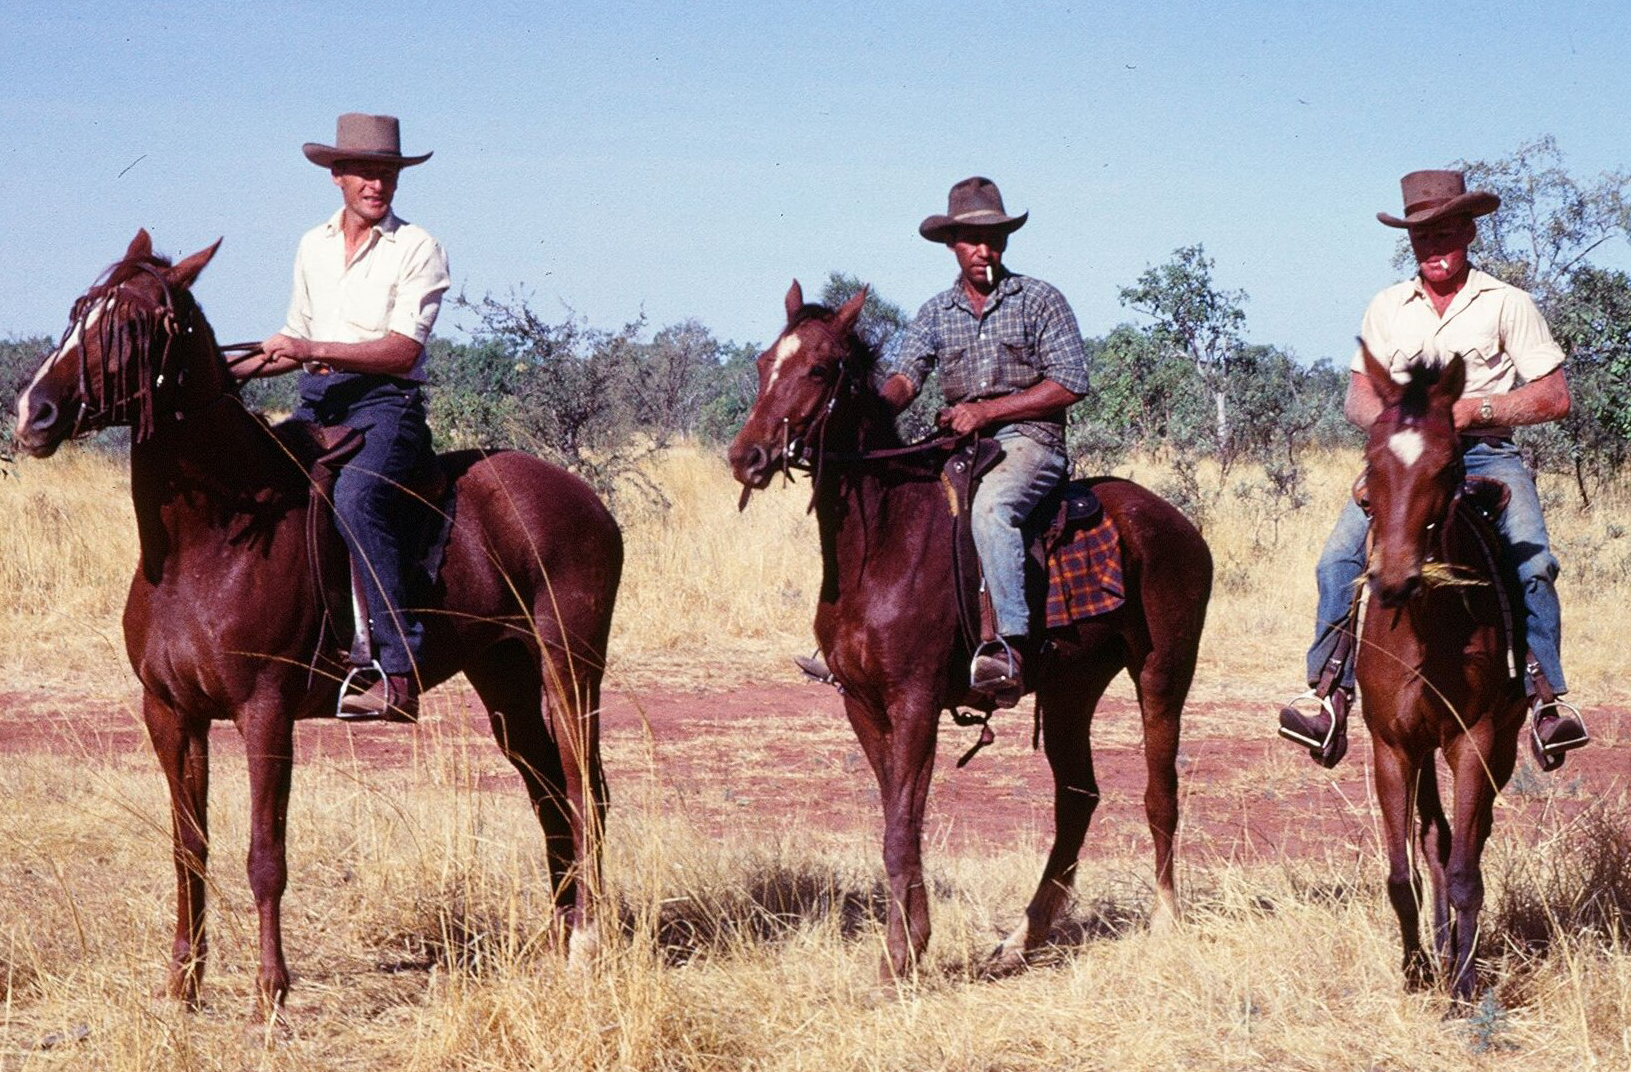 Droving cattle in the Australian Outback.